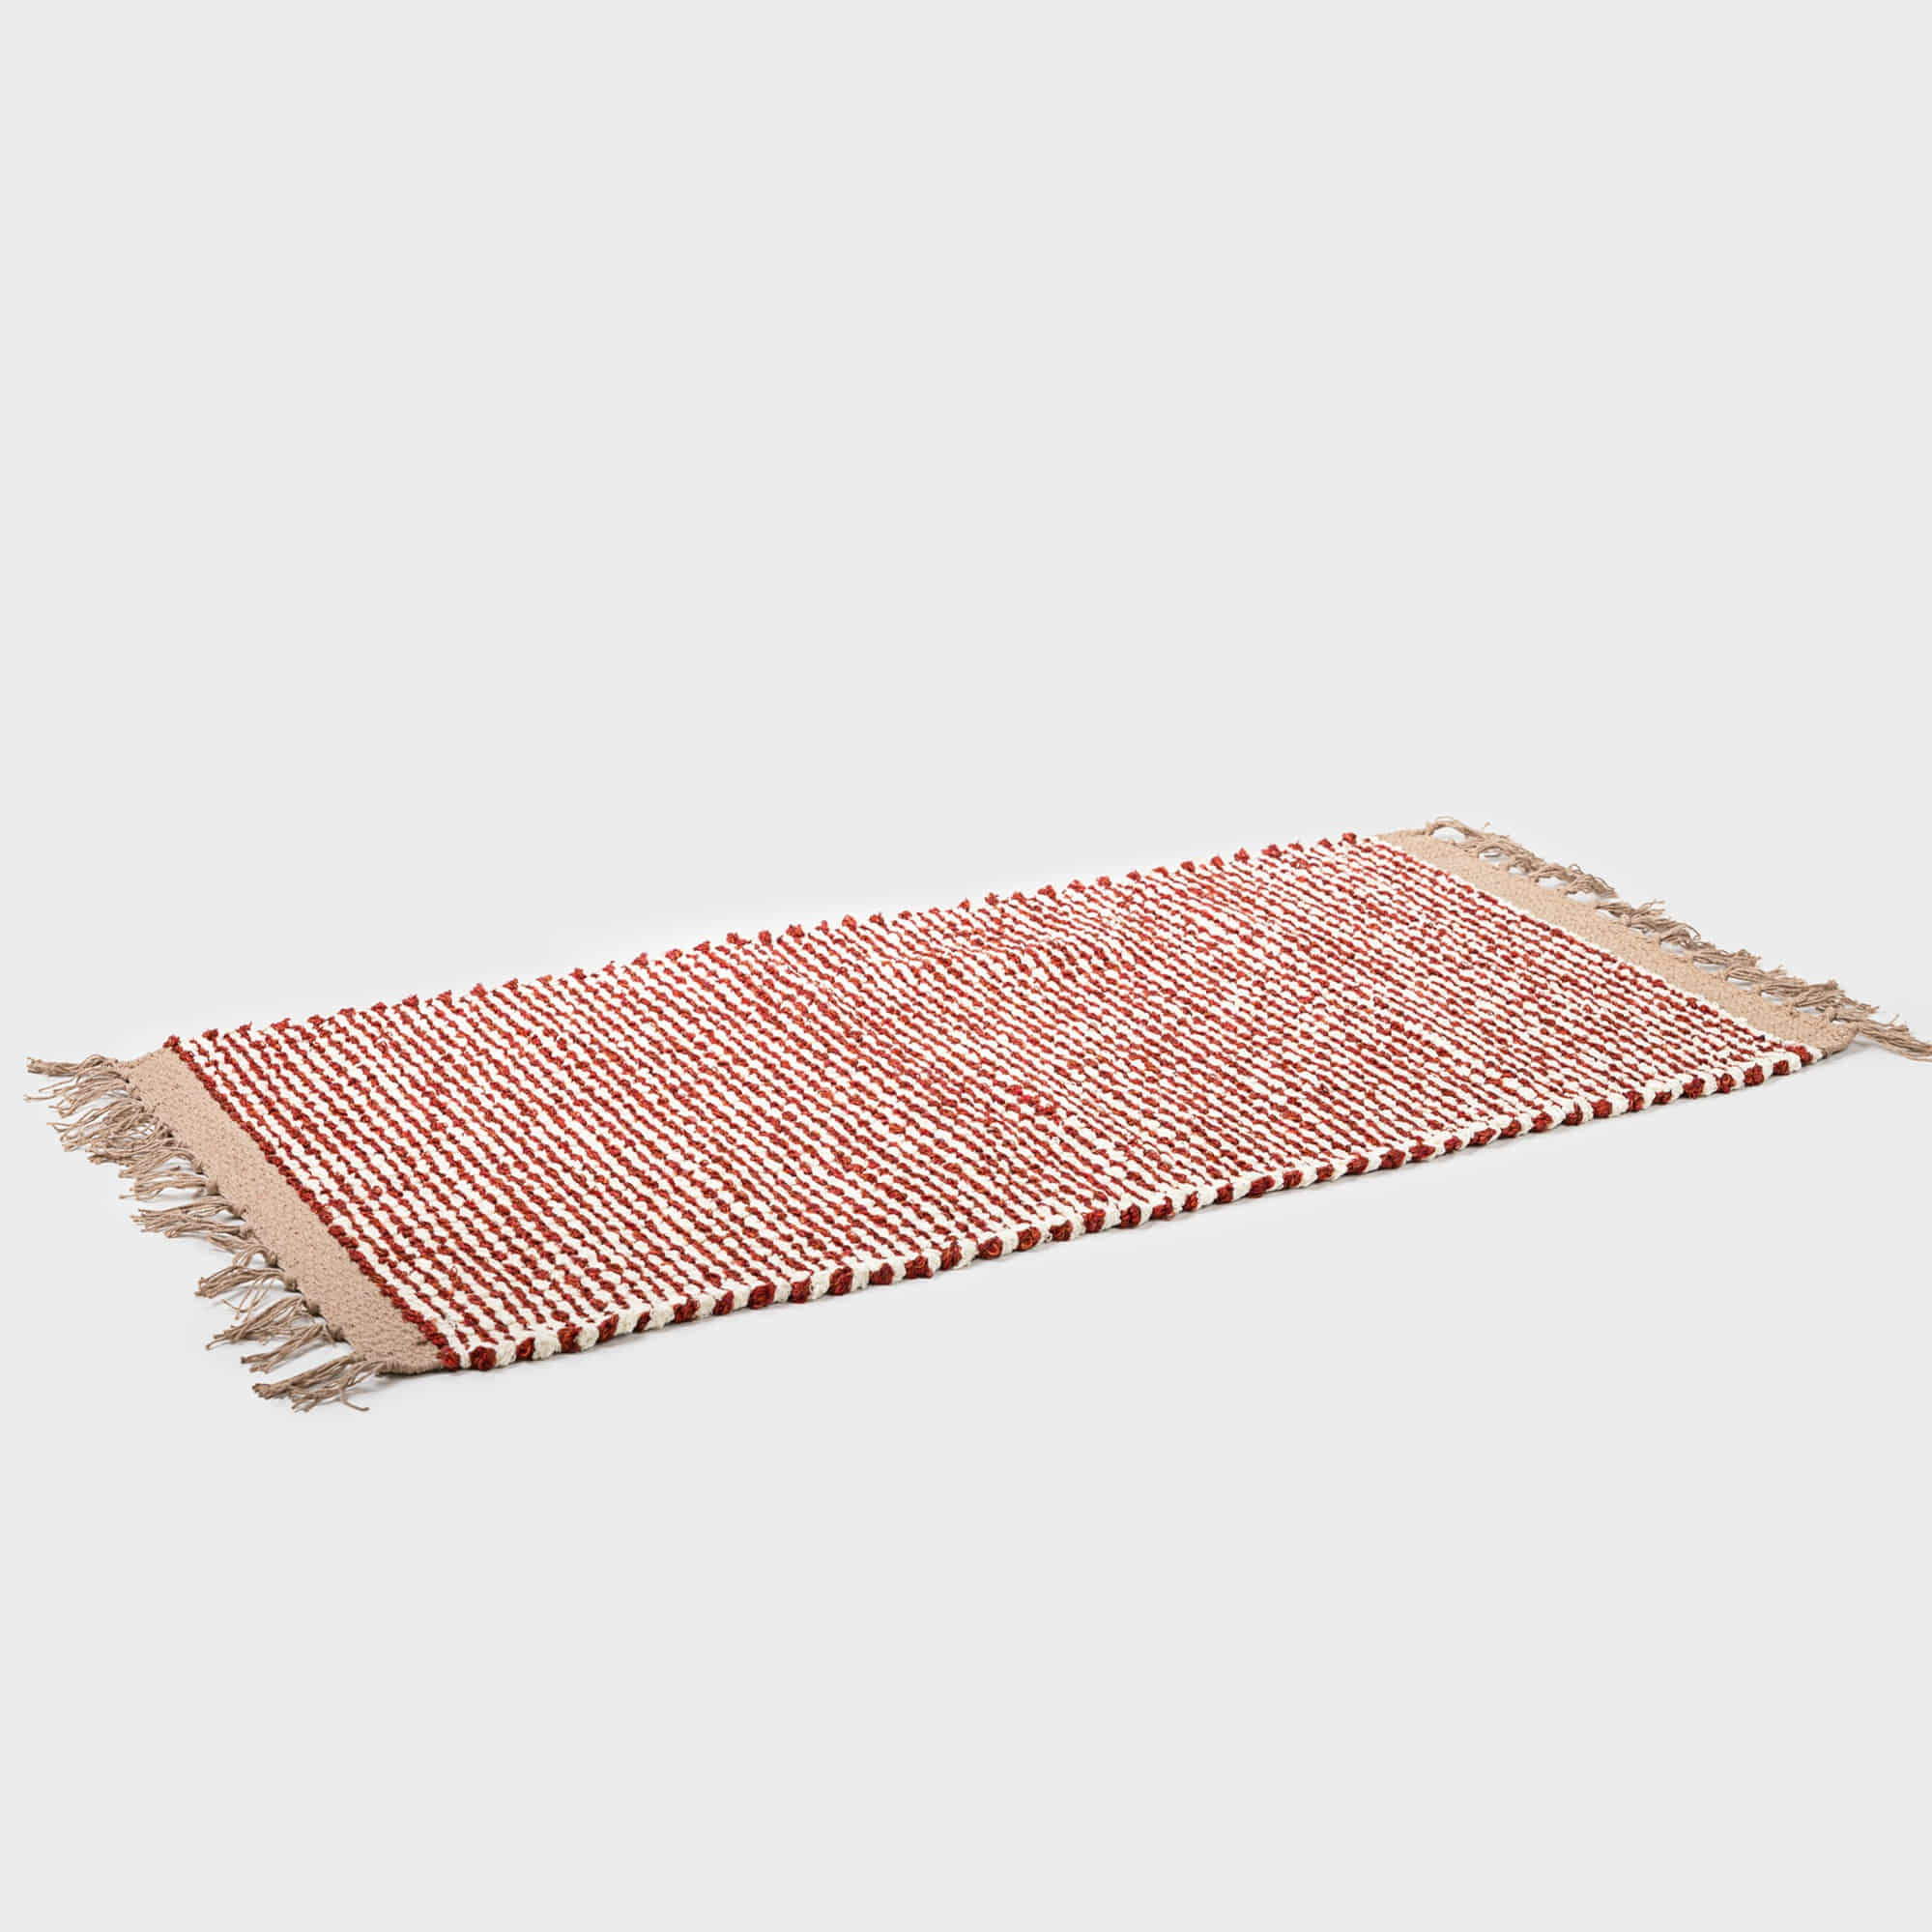 Companhia Loom Popcorn Style Rug Red / Natural White